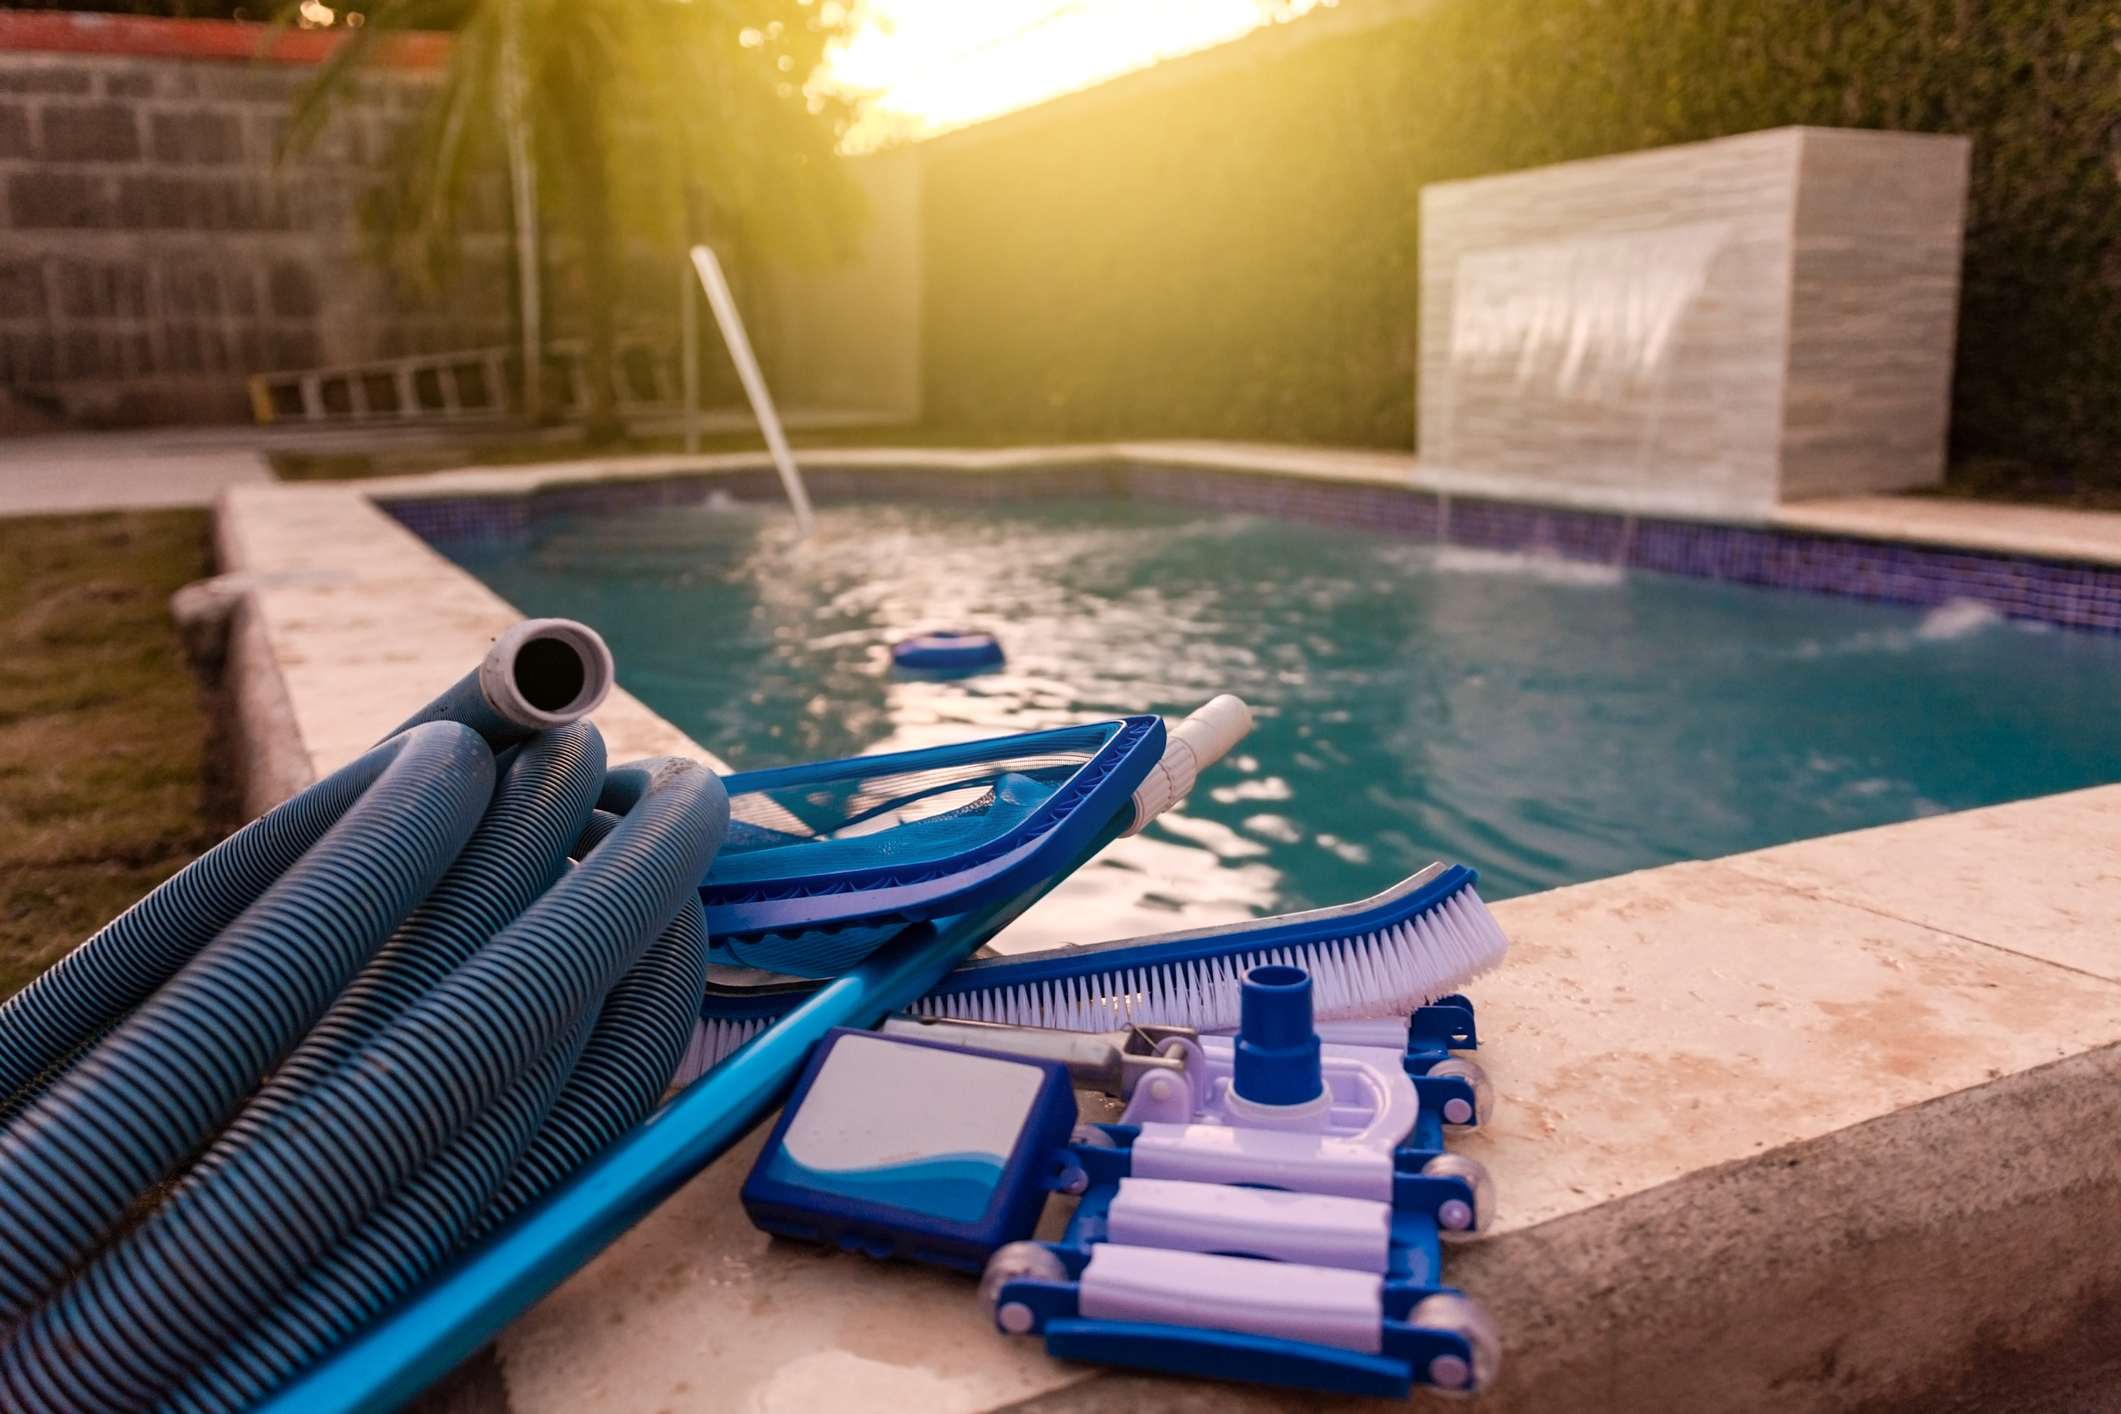 Master pool and spa equipment maintenance with our essential tips and tricks. Learn how to care for your pool, spa, and hot tub to ensure longevity and efficiency. Contact Tropical Pools & Spas for expert help and services.